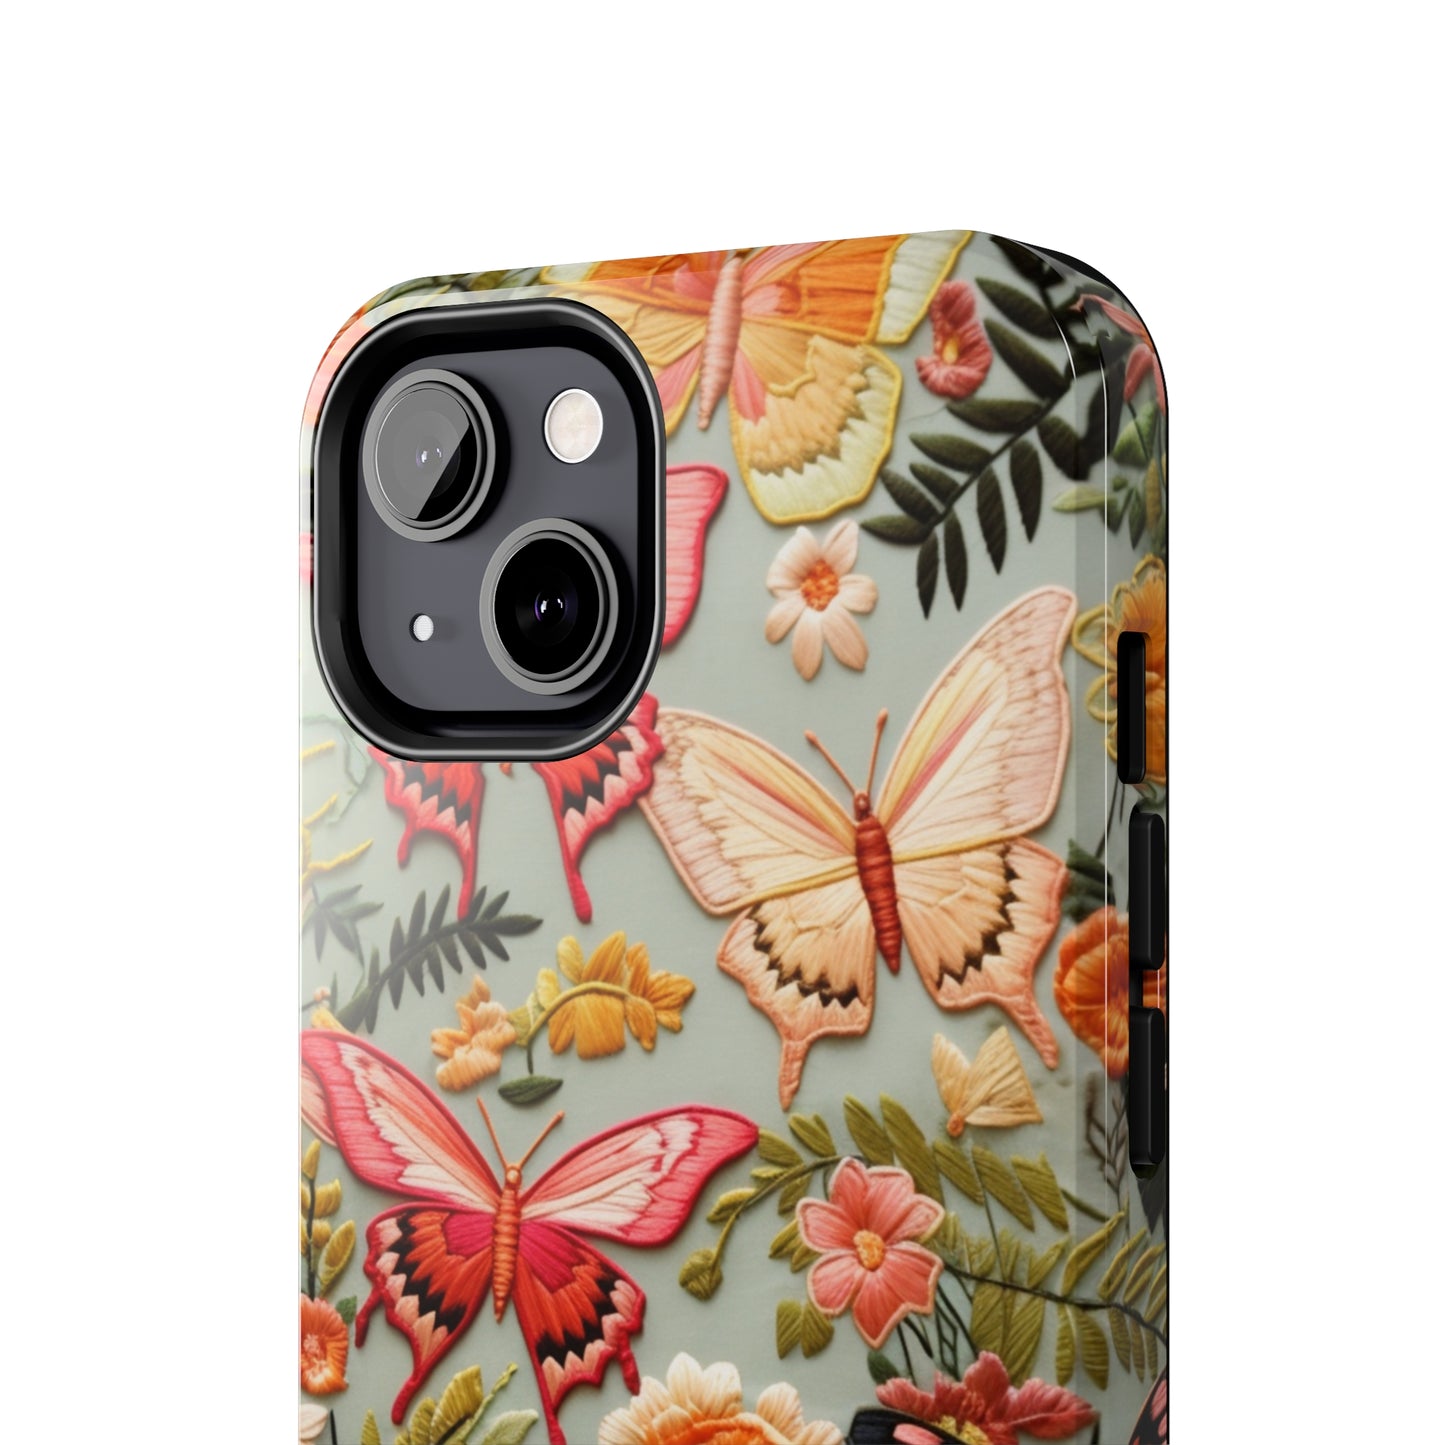 Embroidery Butterflies iPhone Case | Whimsical Elegance and Nature's Beauty in Handcrafted Detail